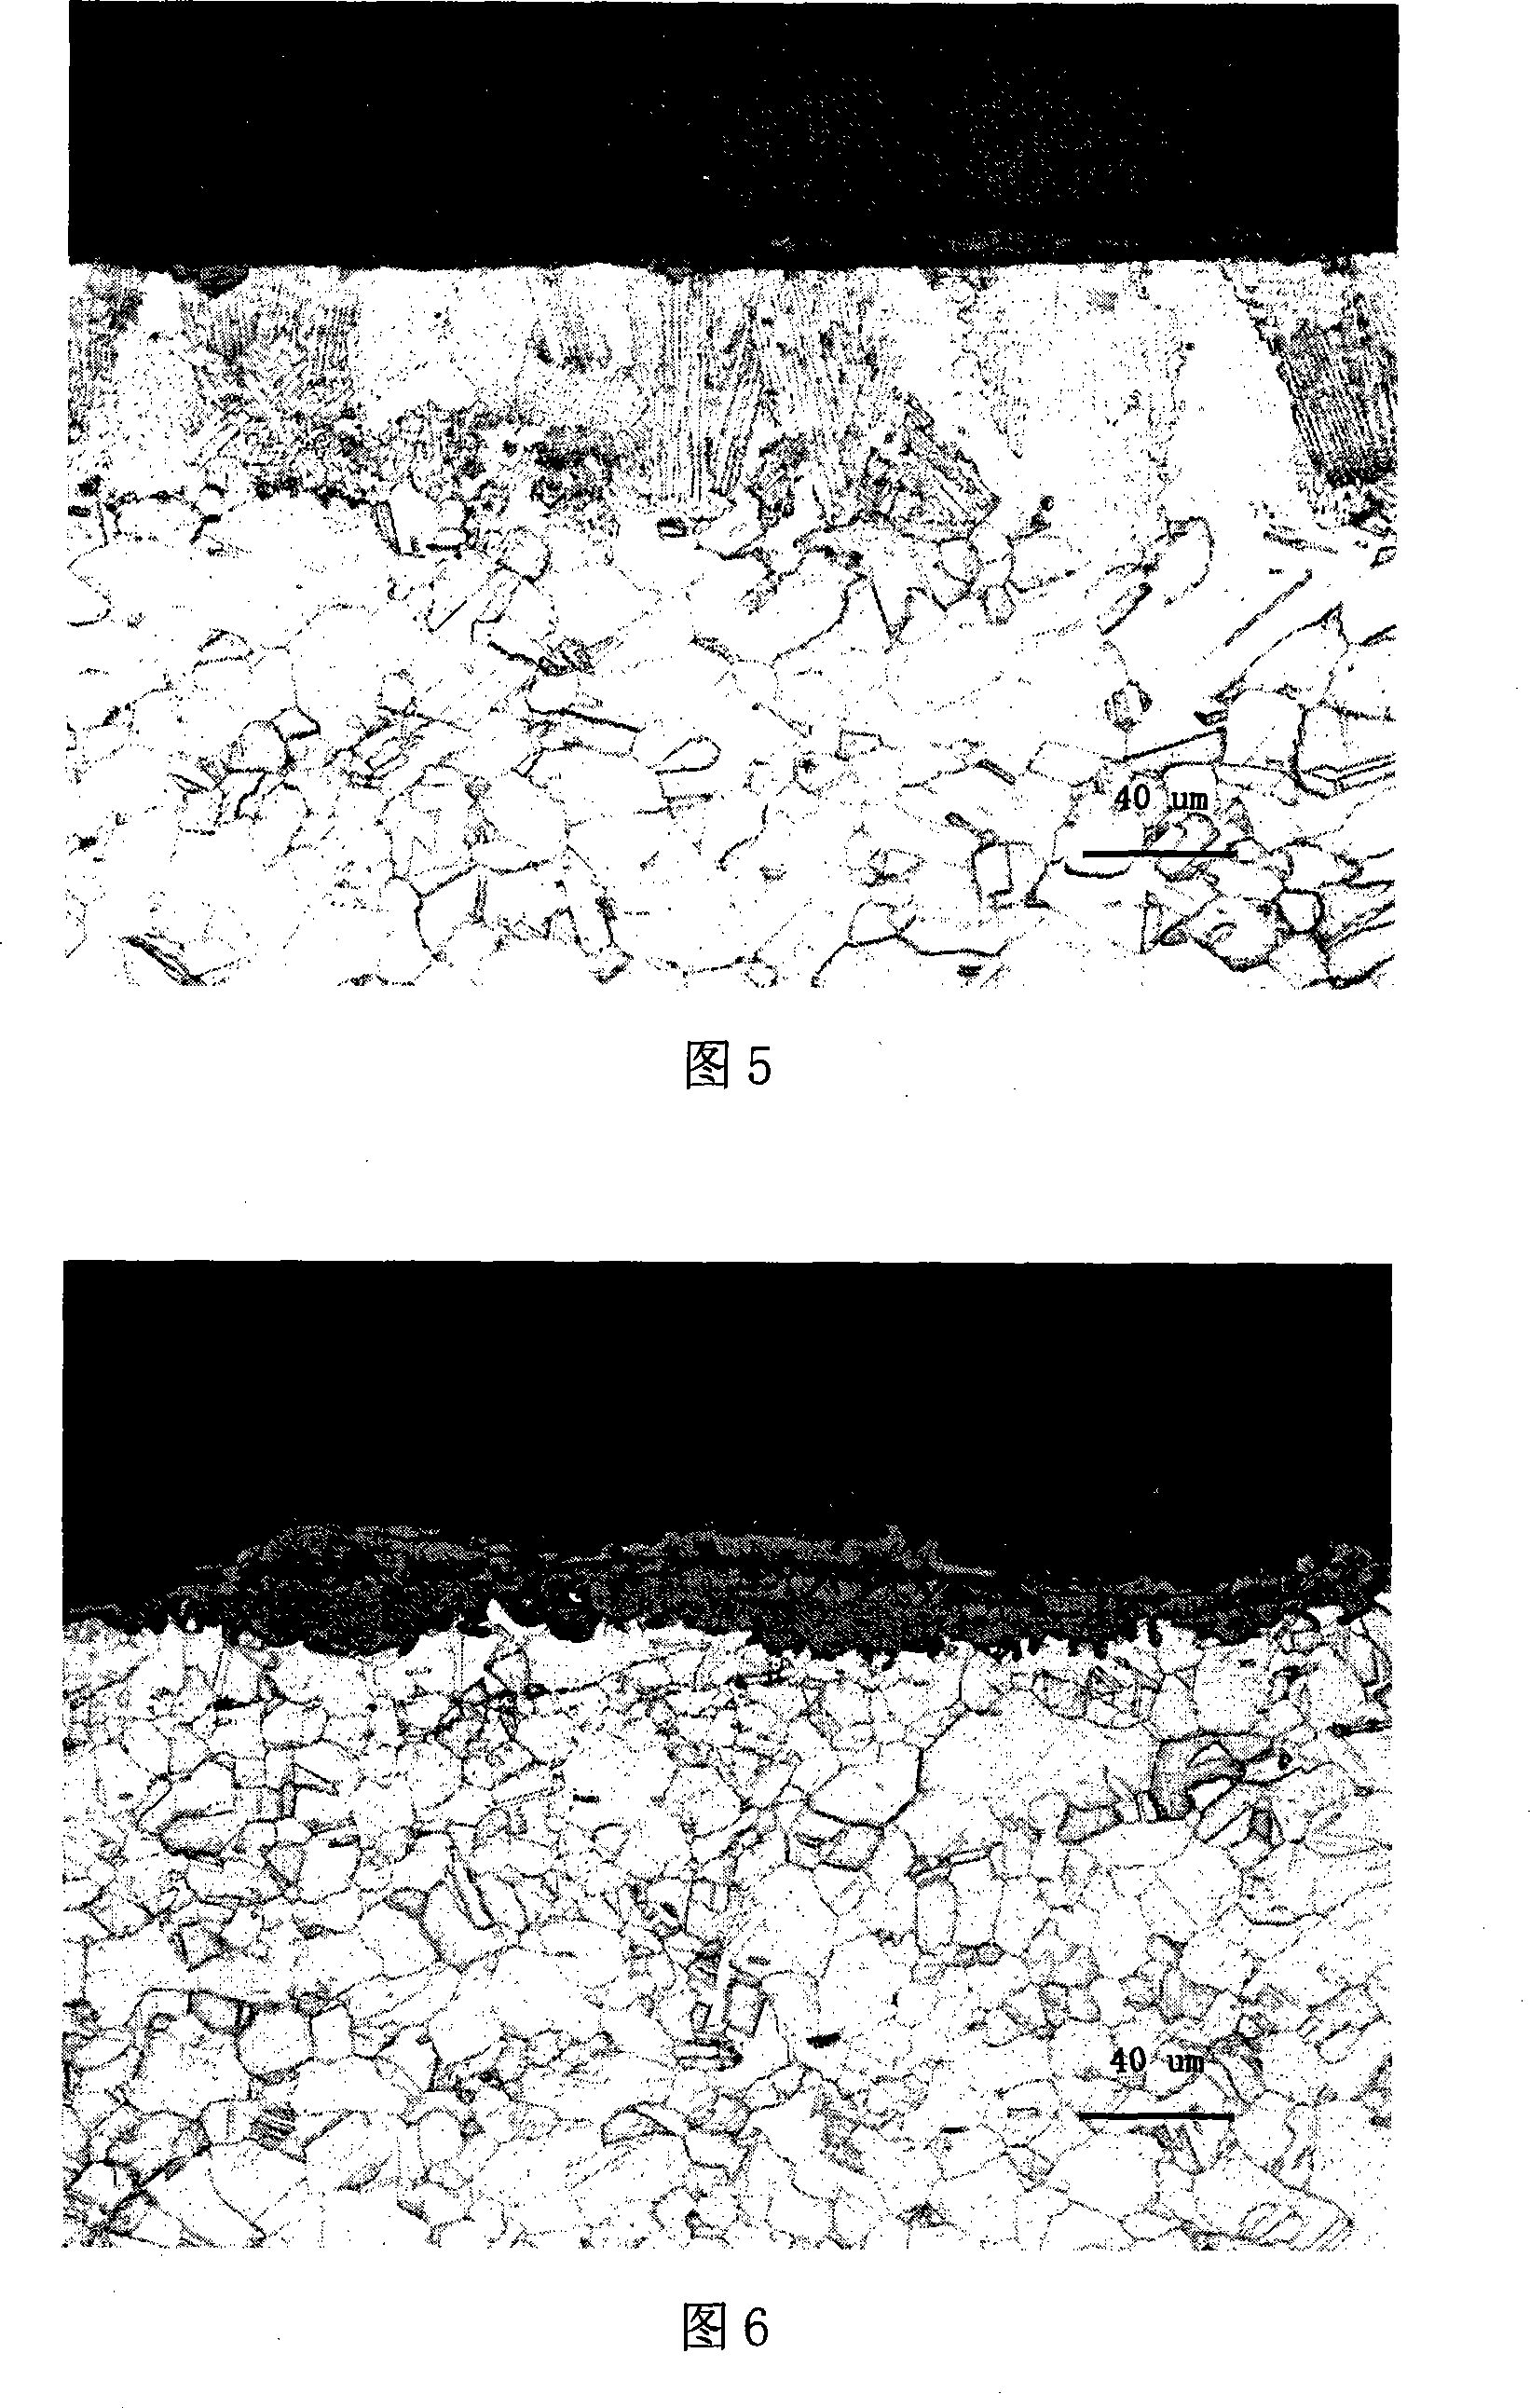 Method for improving resistant property of heat resistant steel for high-temperature water vapour oxidation